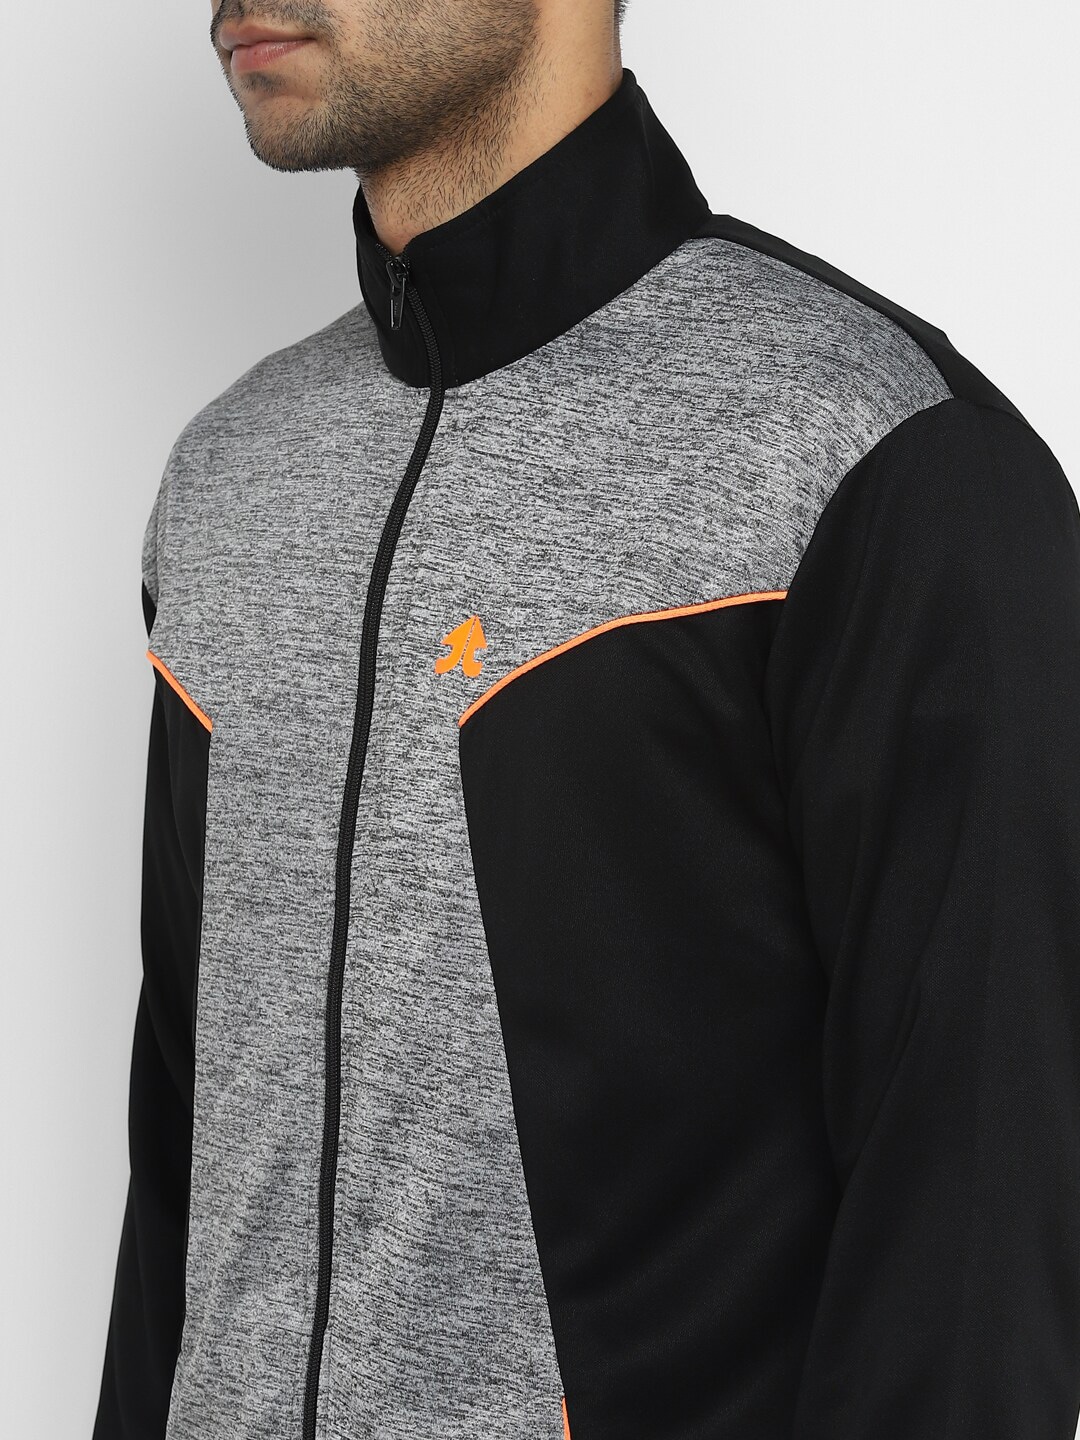 Clothing Tracksuits | OFF LIMITS Men Grey & Black Colourblocked Track Suit - LF41649